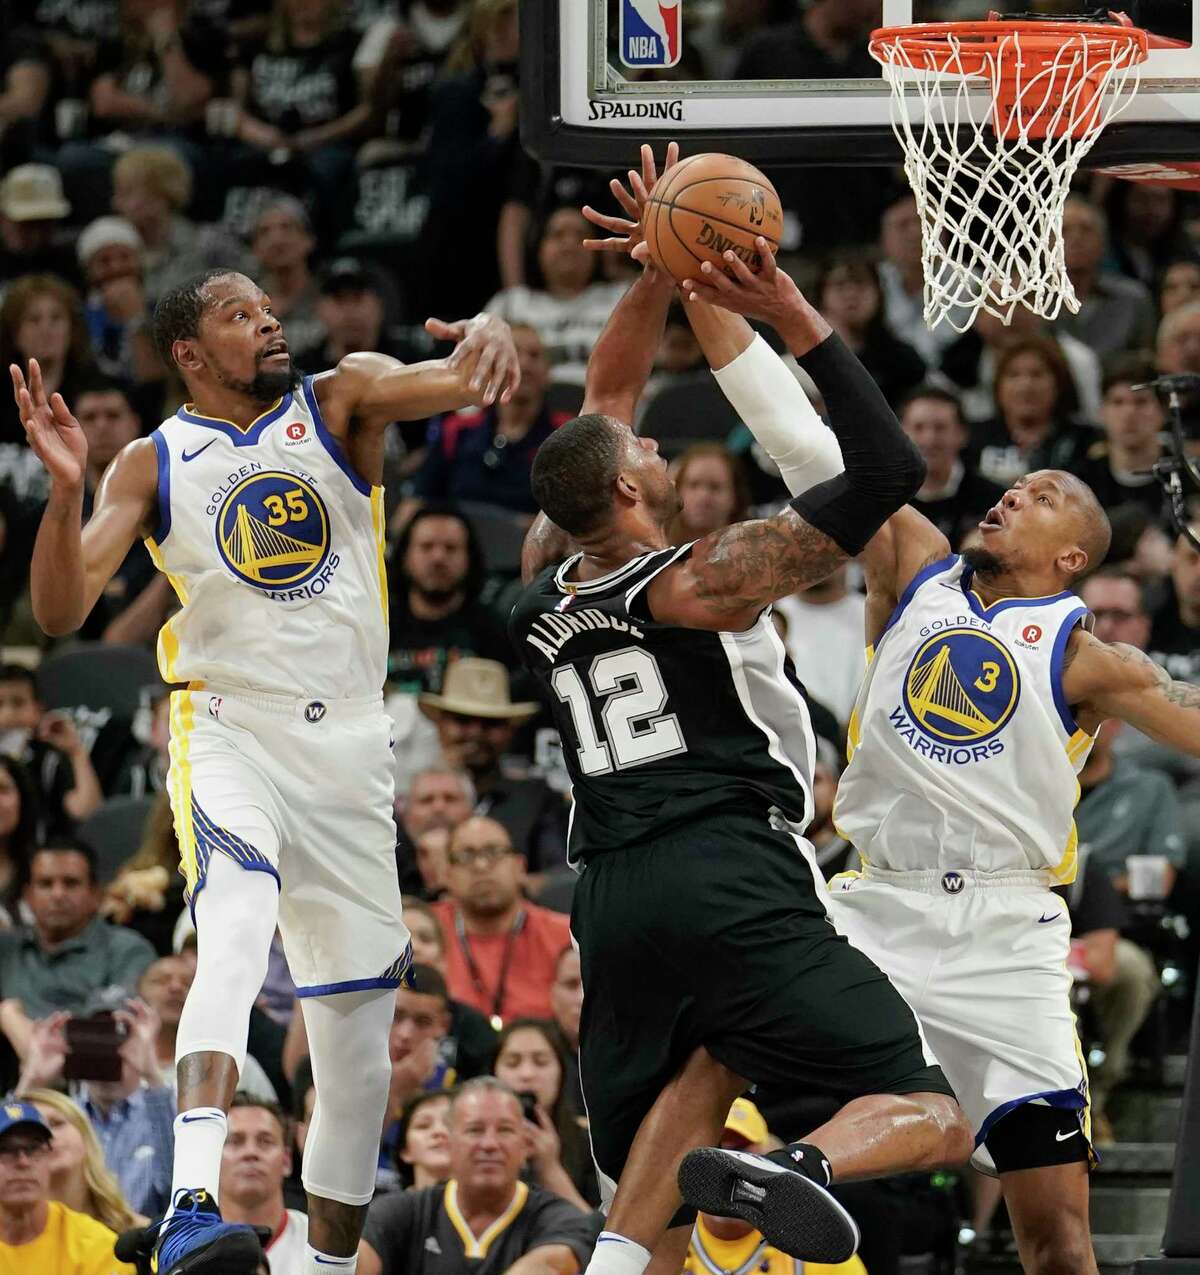 San Antonio Spurs' LaMarcus Aldridge (12) shoots against Golden State Warriors' David West (3) and Kevin Durant during the first half of Game 4 of a first-round NBA basketball playoff series in San Antonio, Sunday, April 22, 2018, in San Antonio. (AP Photo/Darren Abate)